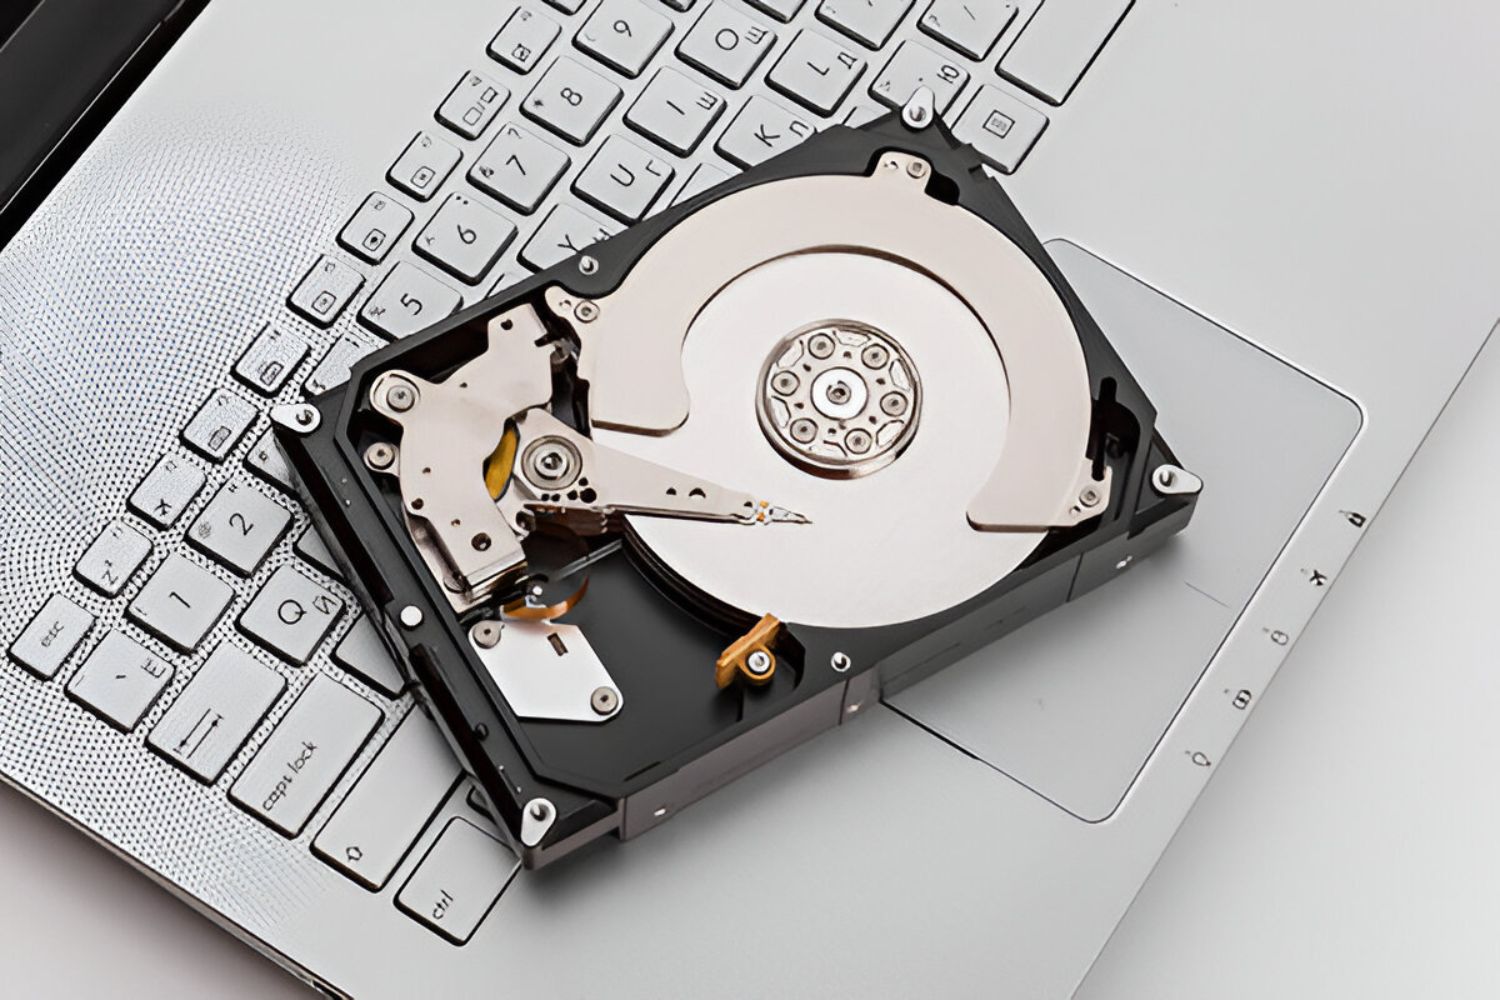 How To Get Hard Drive Out Of Ultrabook